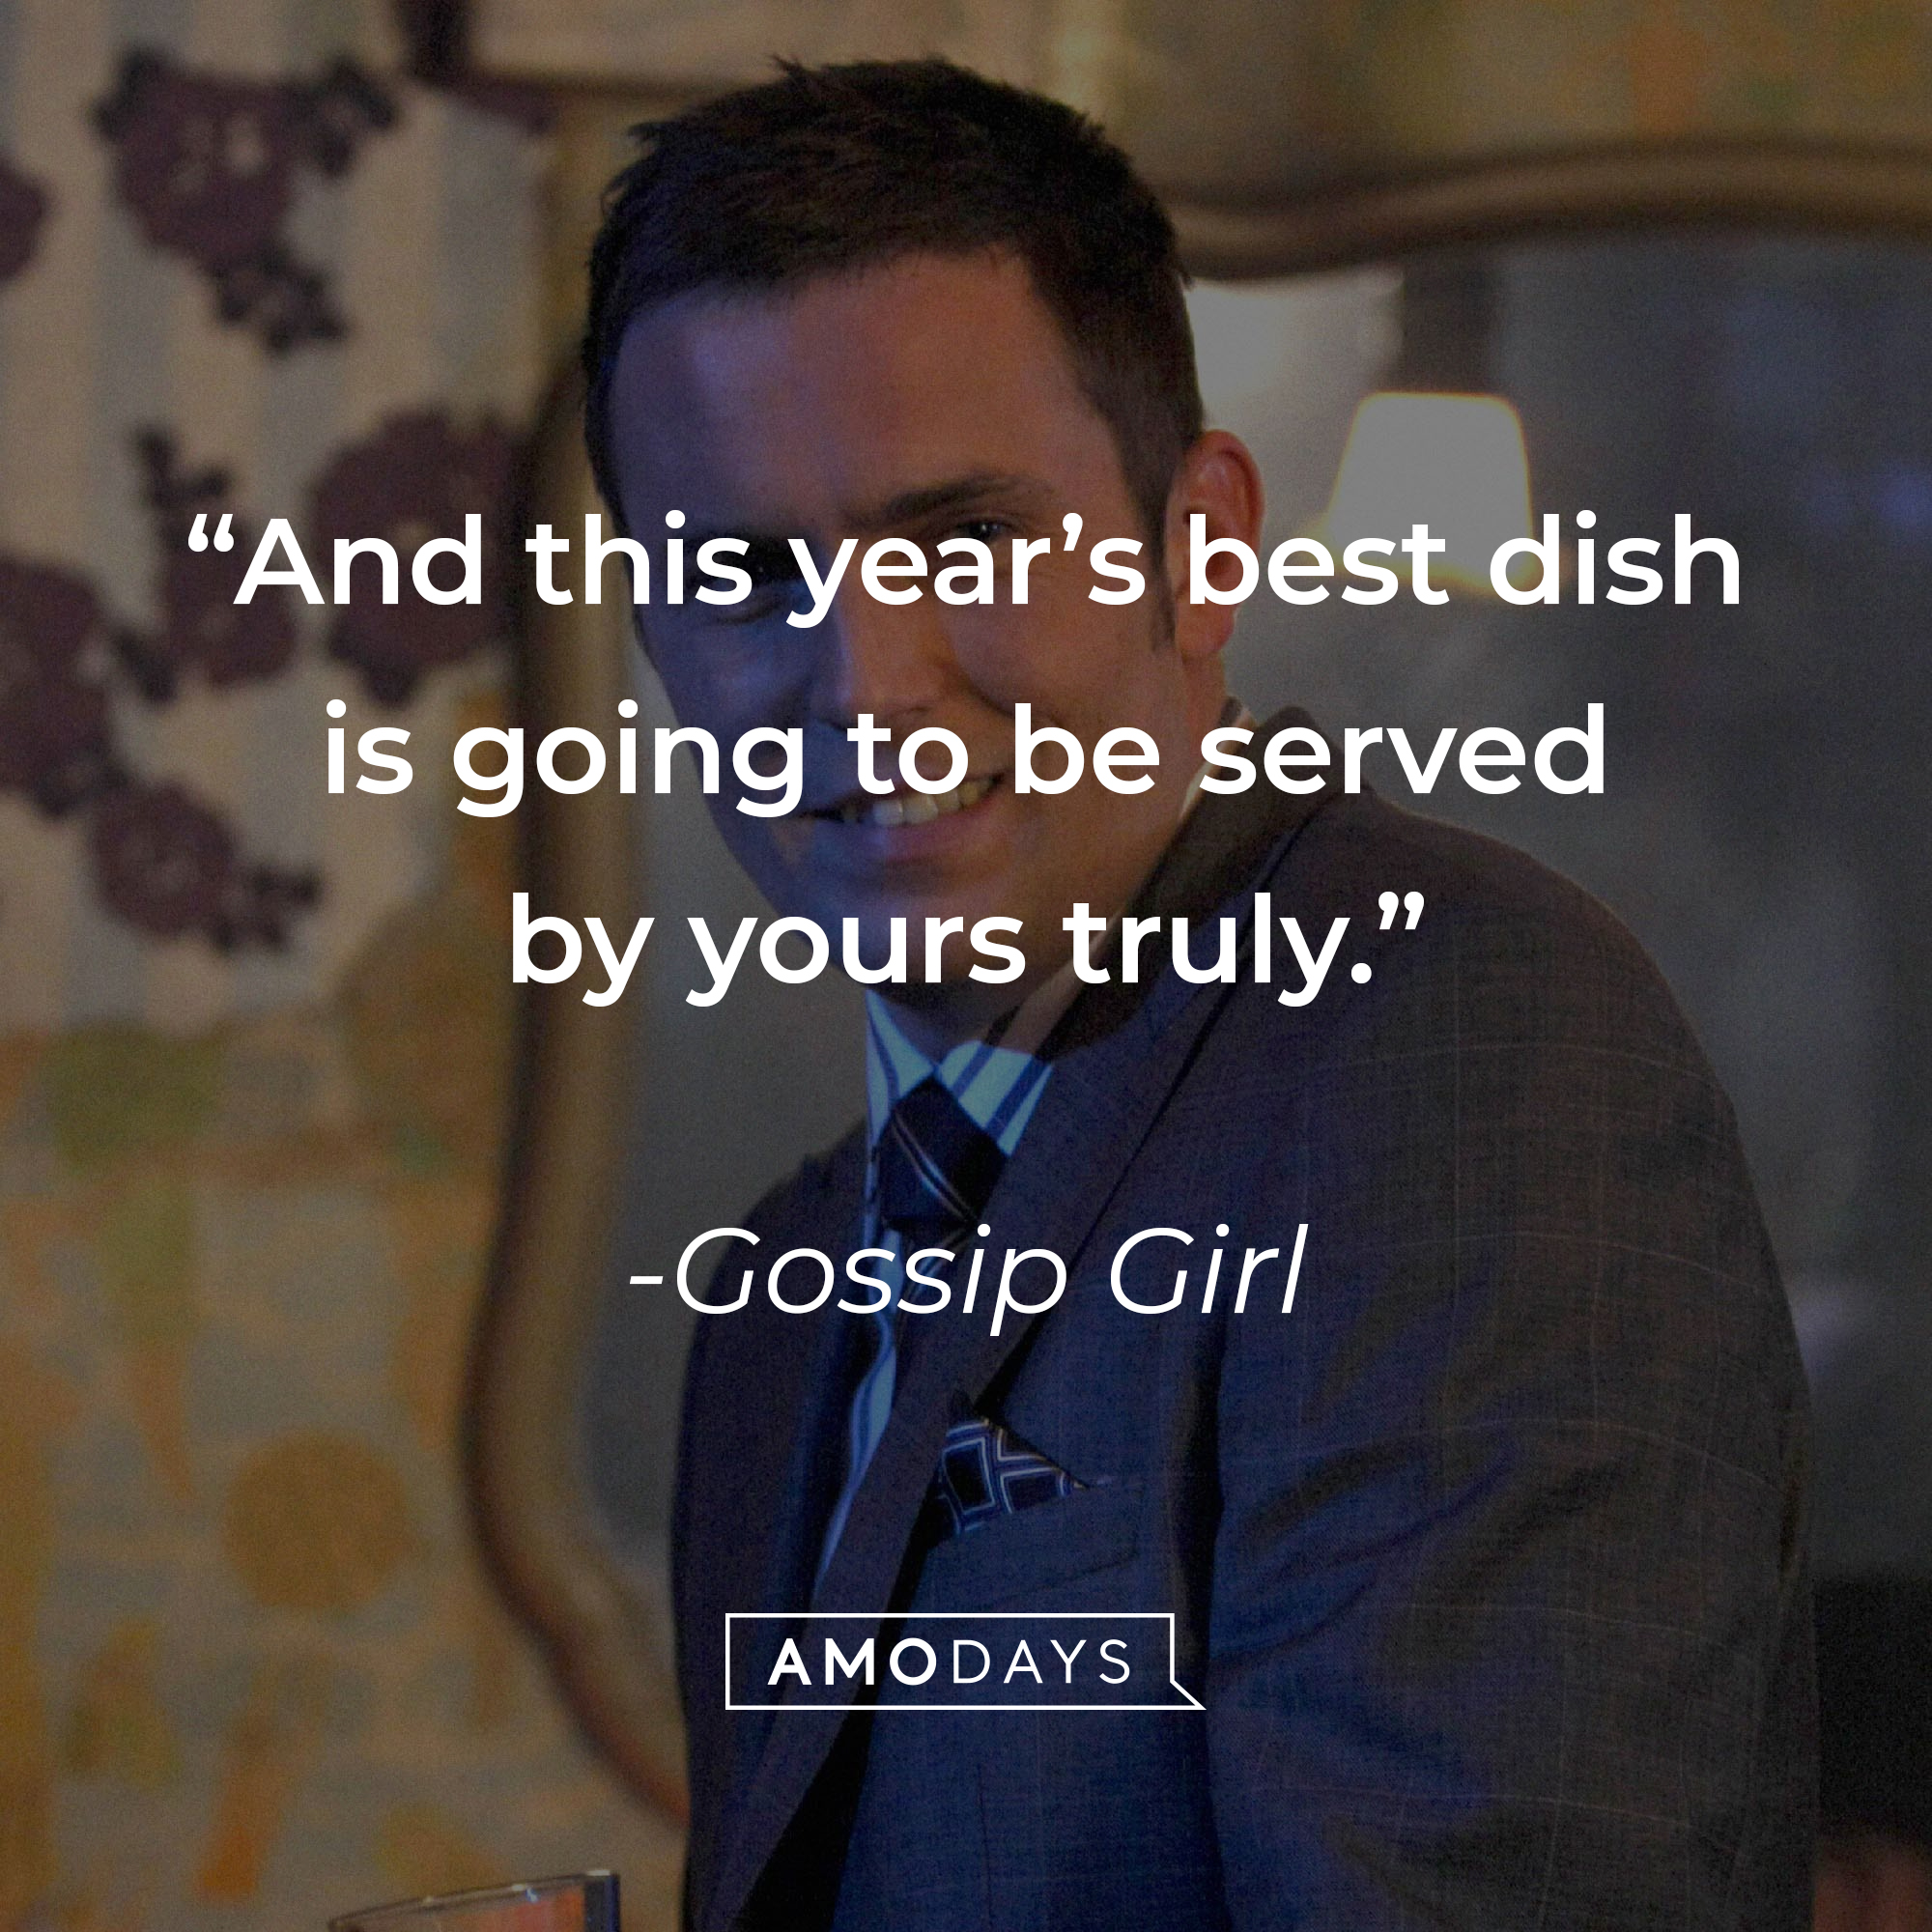 Image from "Gossip Girl" with the quote: "And this year’s best dish is going to be served by yours truly." | Source: facebook.com/GossipGirl